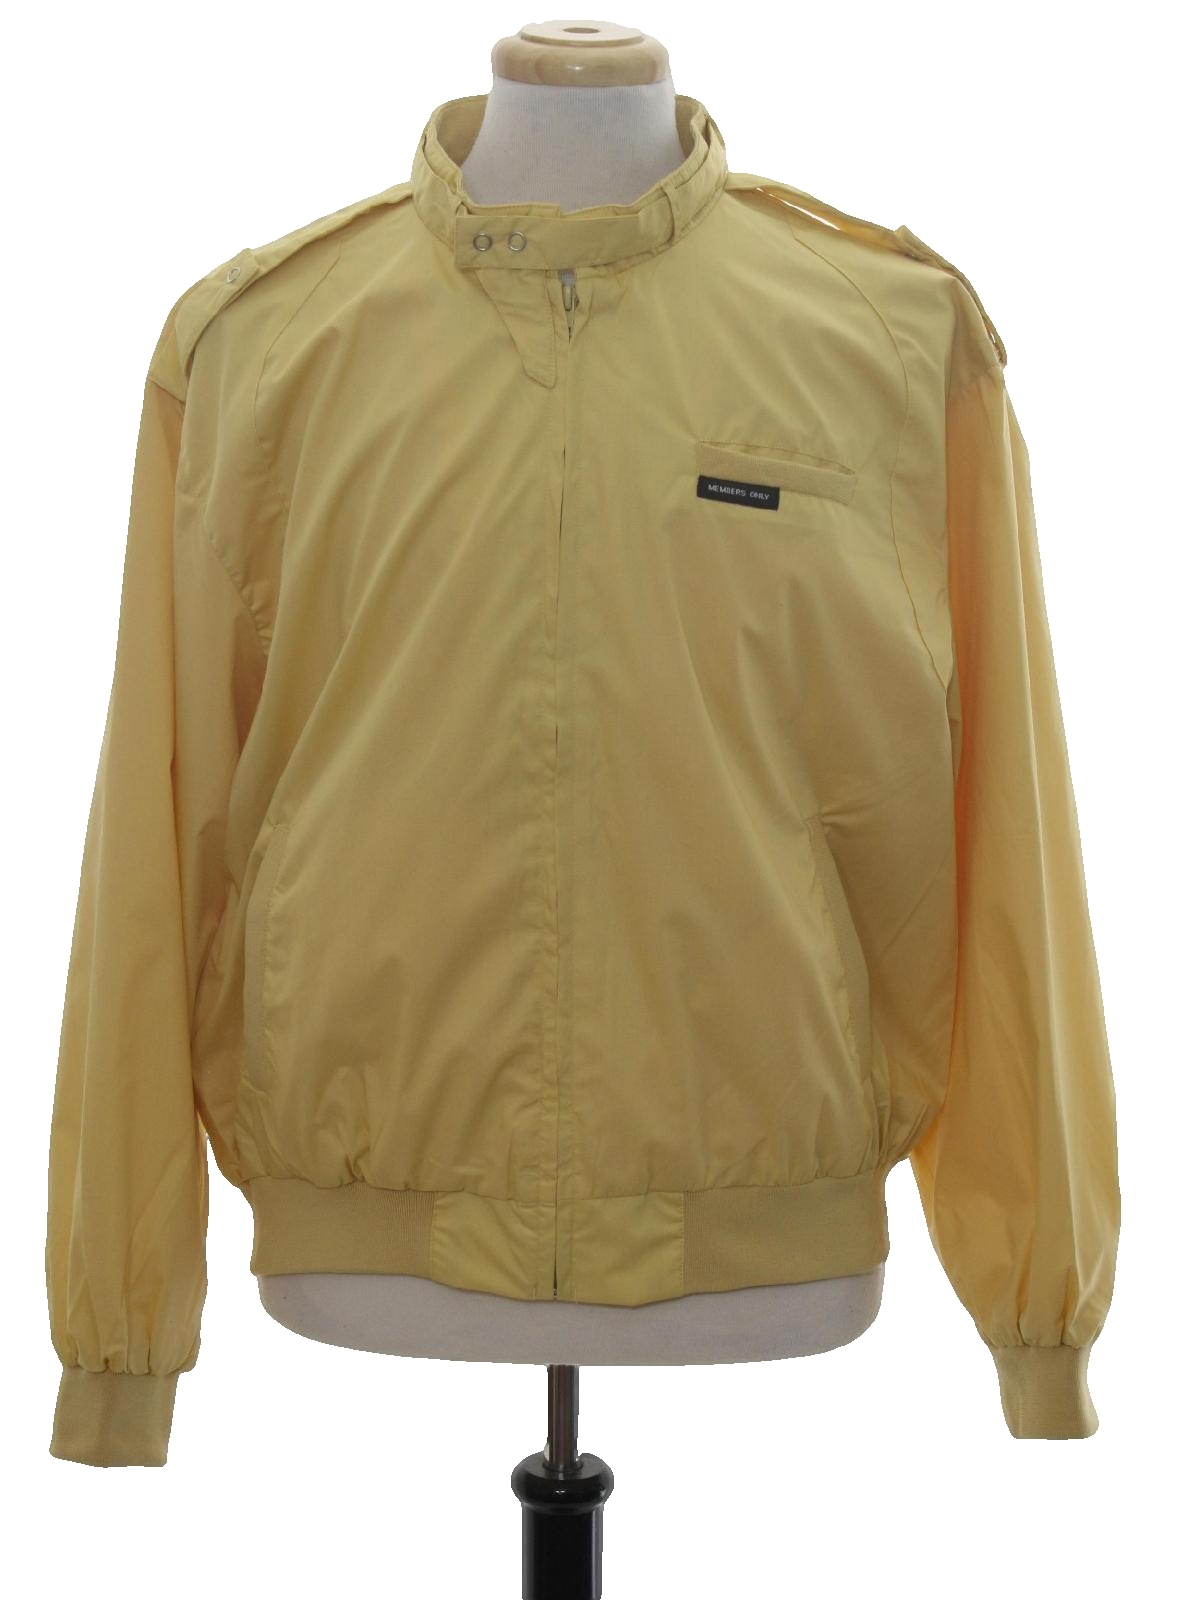 80s Vintage Members Only Jacket: 80s -Members Only- Mens yellow butter ...